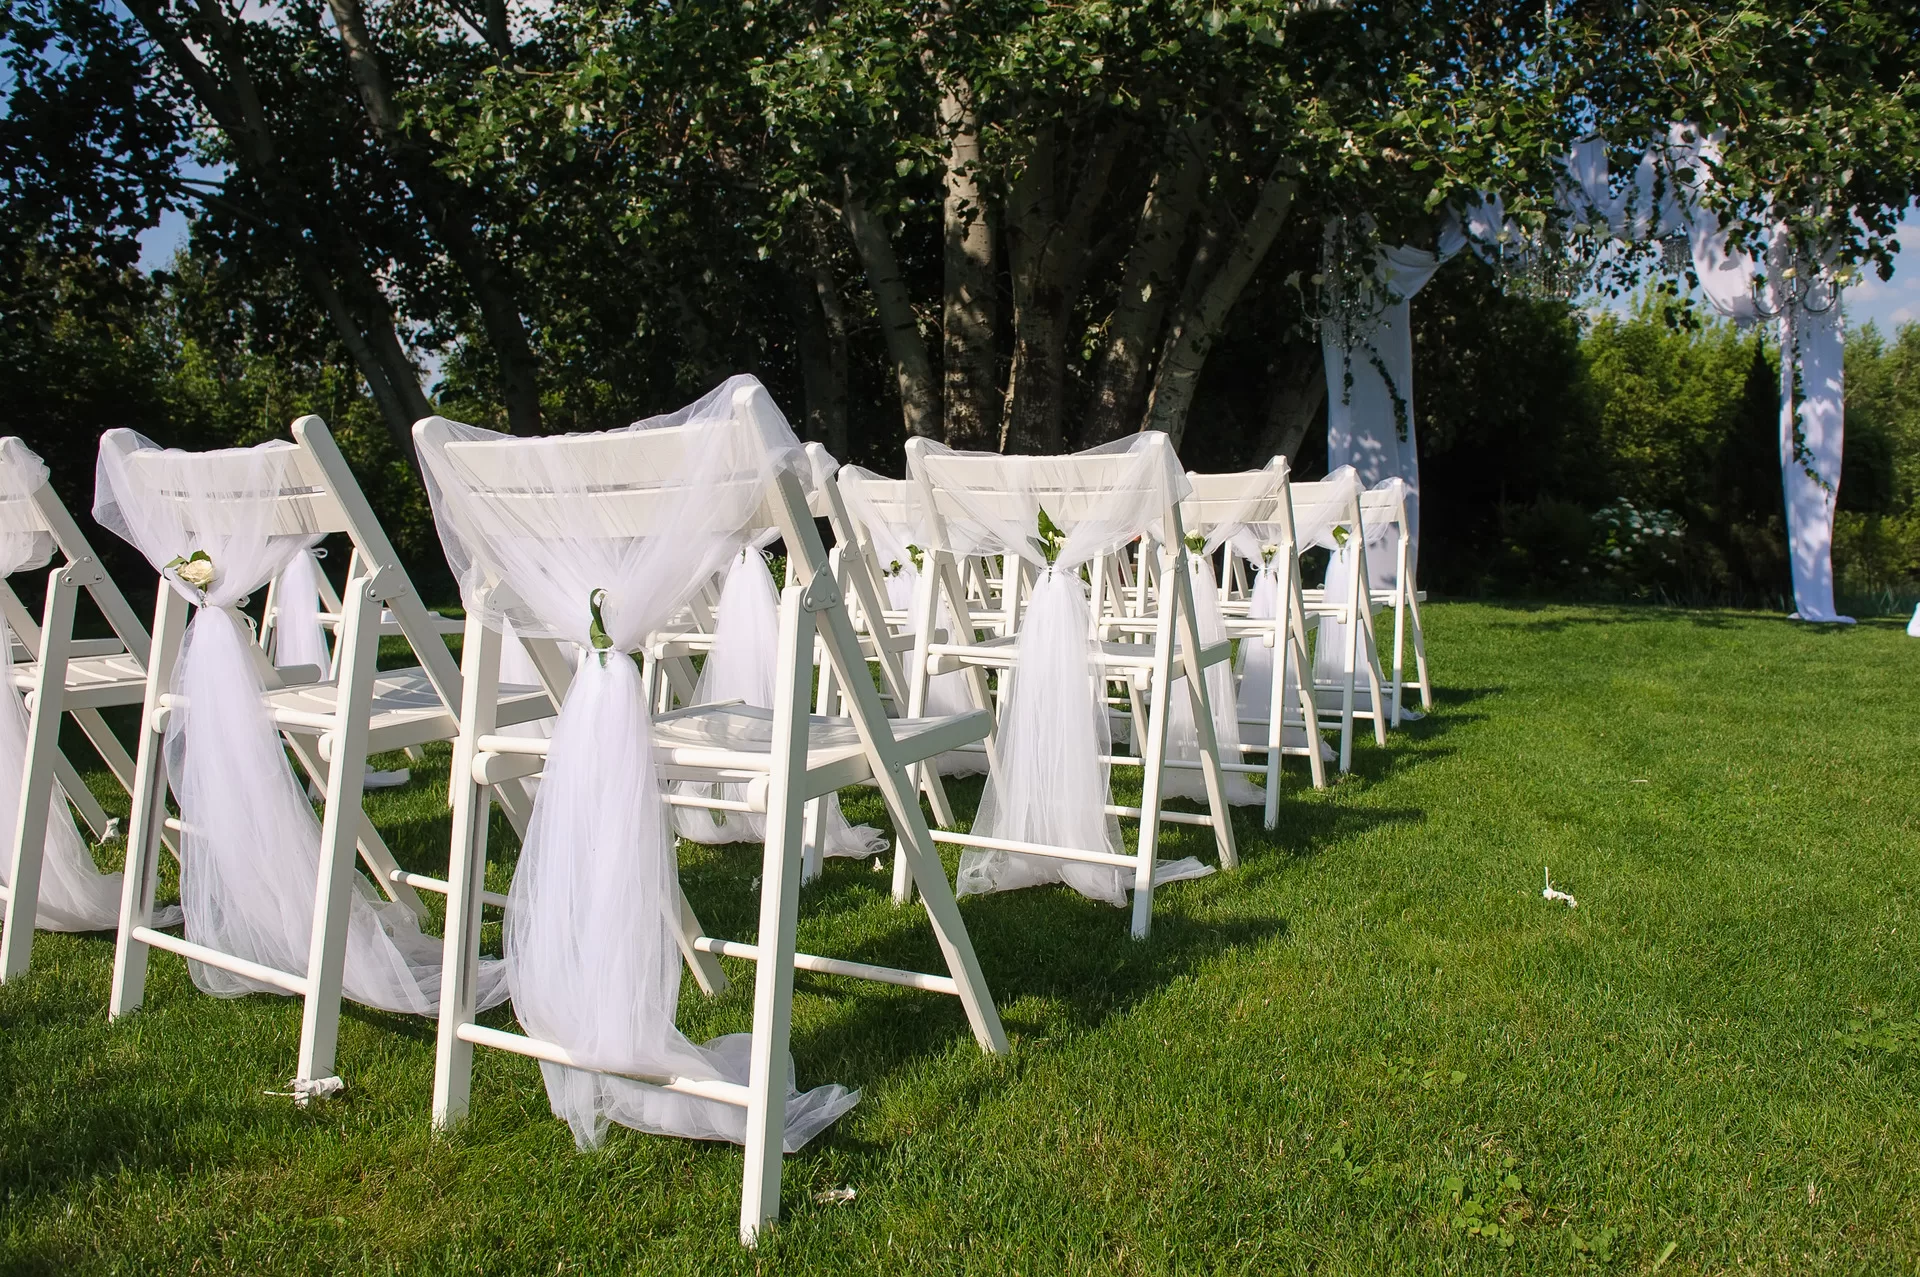 Choosing What Type of Chairs to Rent For Your Event